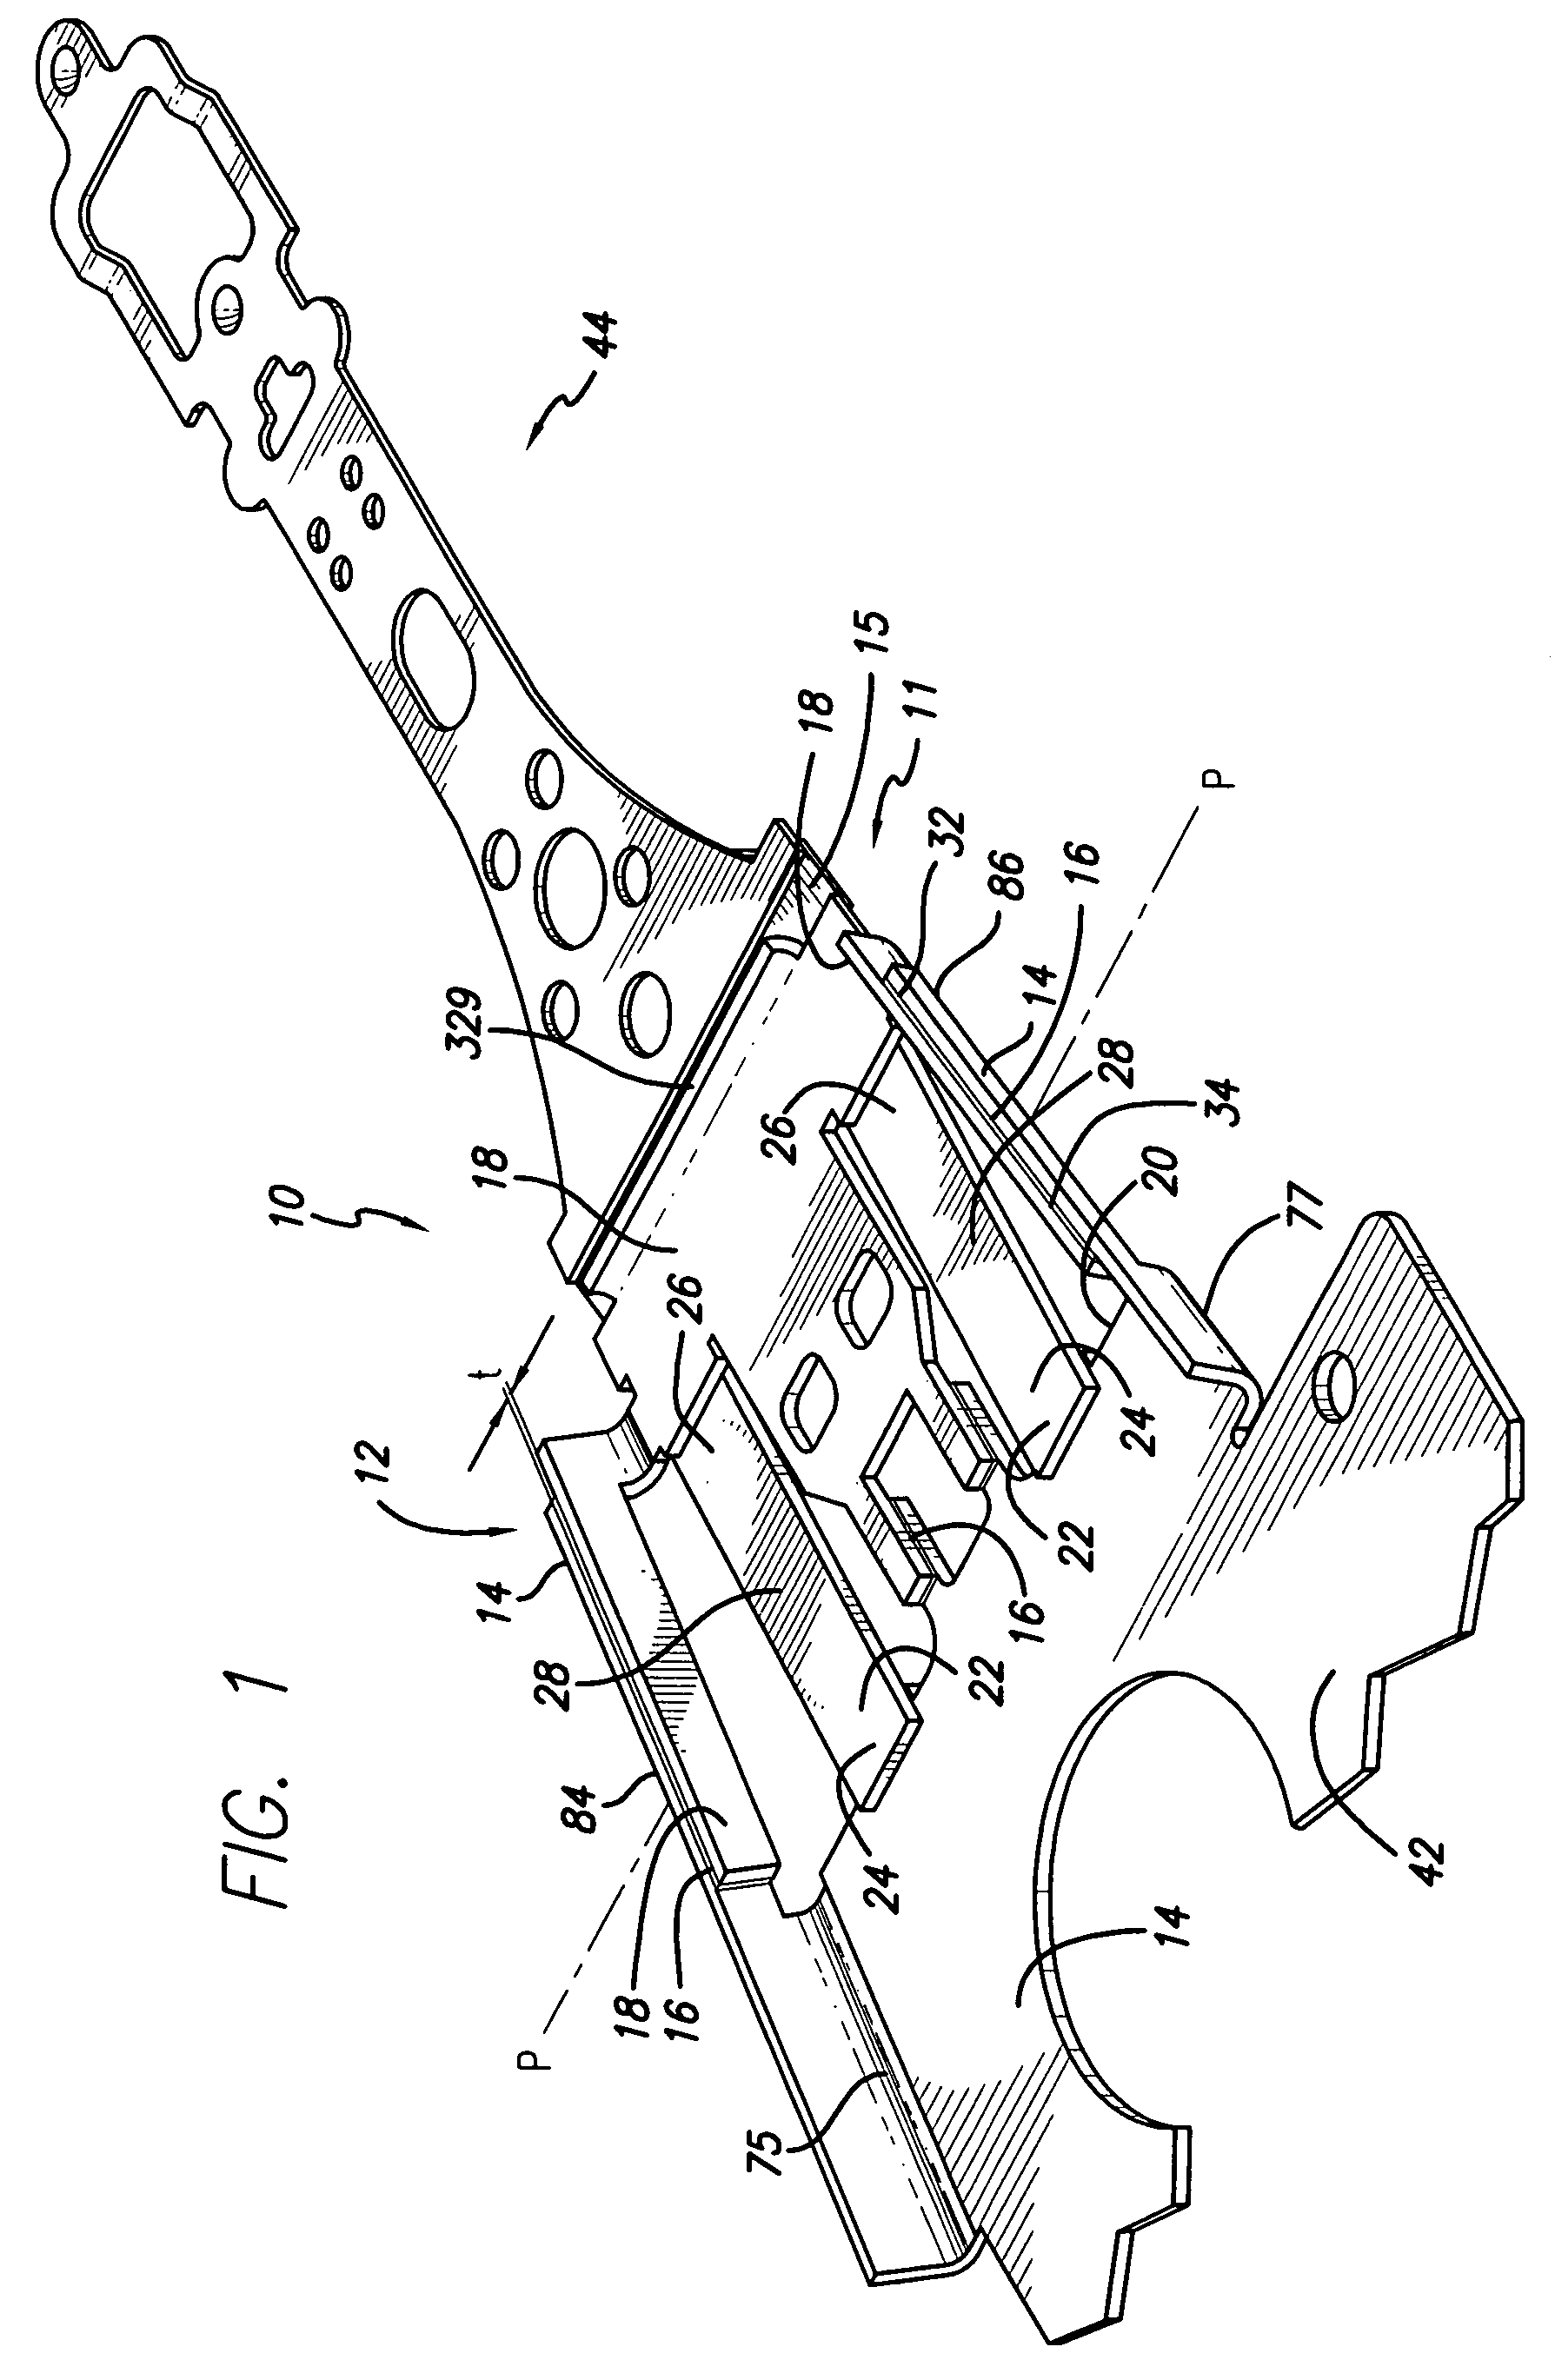 Microactuated suspension with shear transmission of force